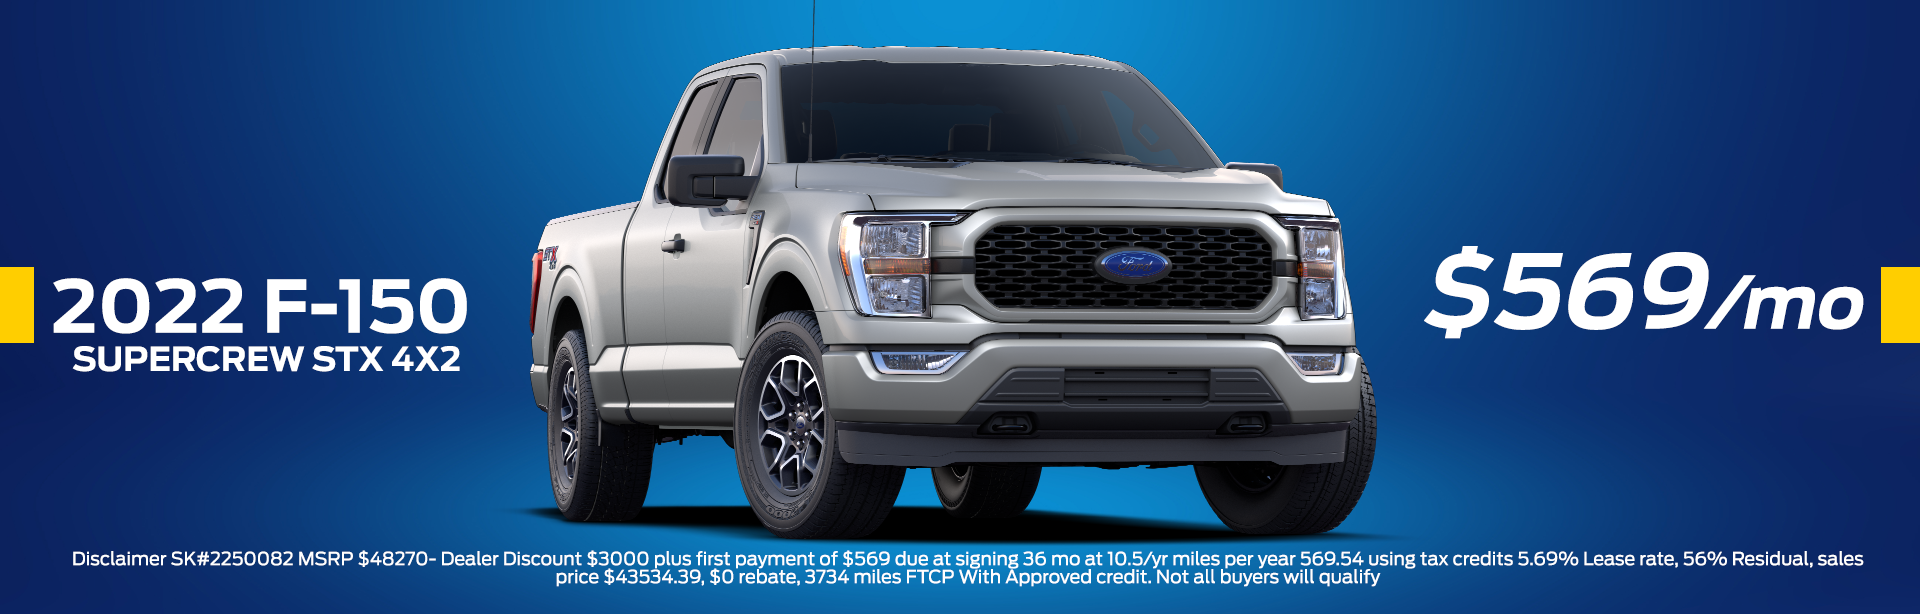 f150-banners